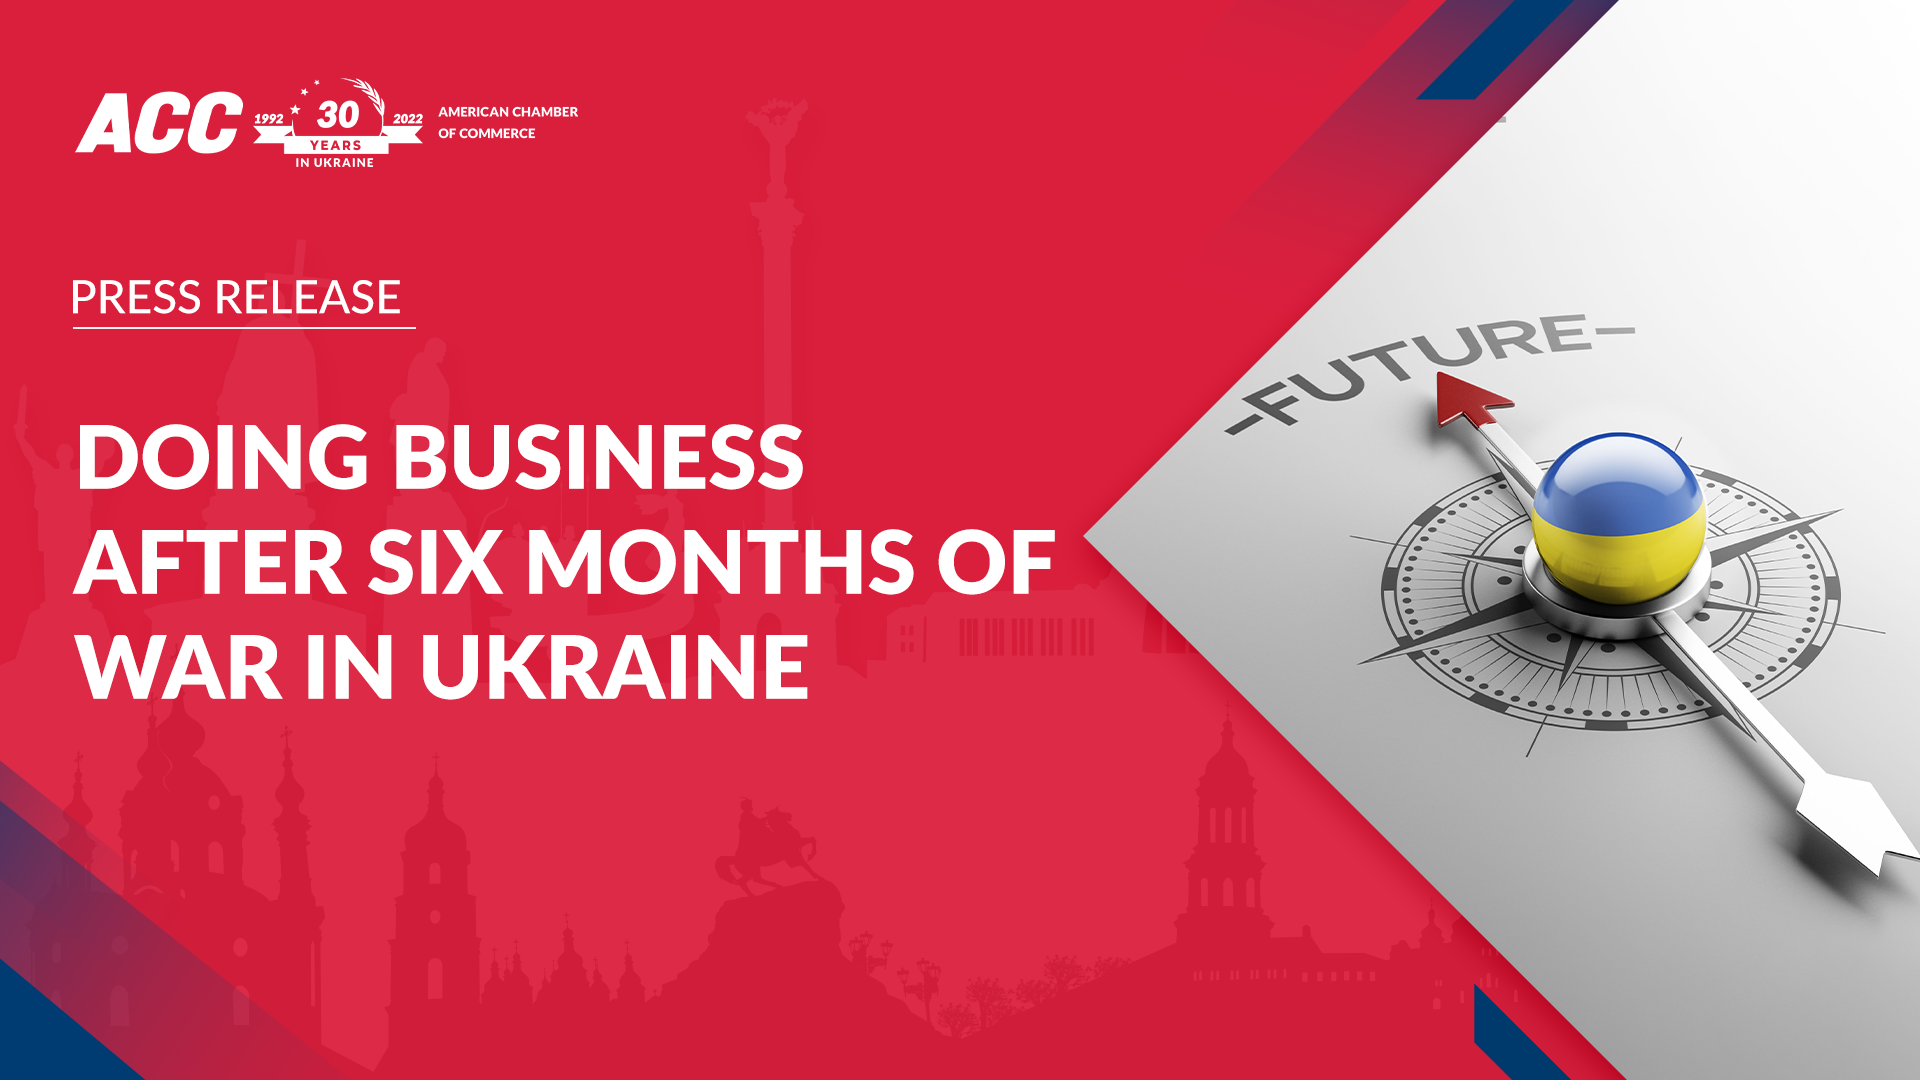 Doing Business after Six Months of War in Ukraine – AmCham Ukraine latest survey results: 72% of members fully operational